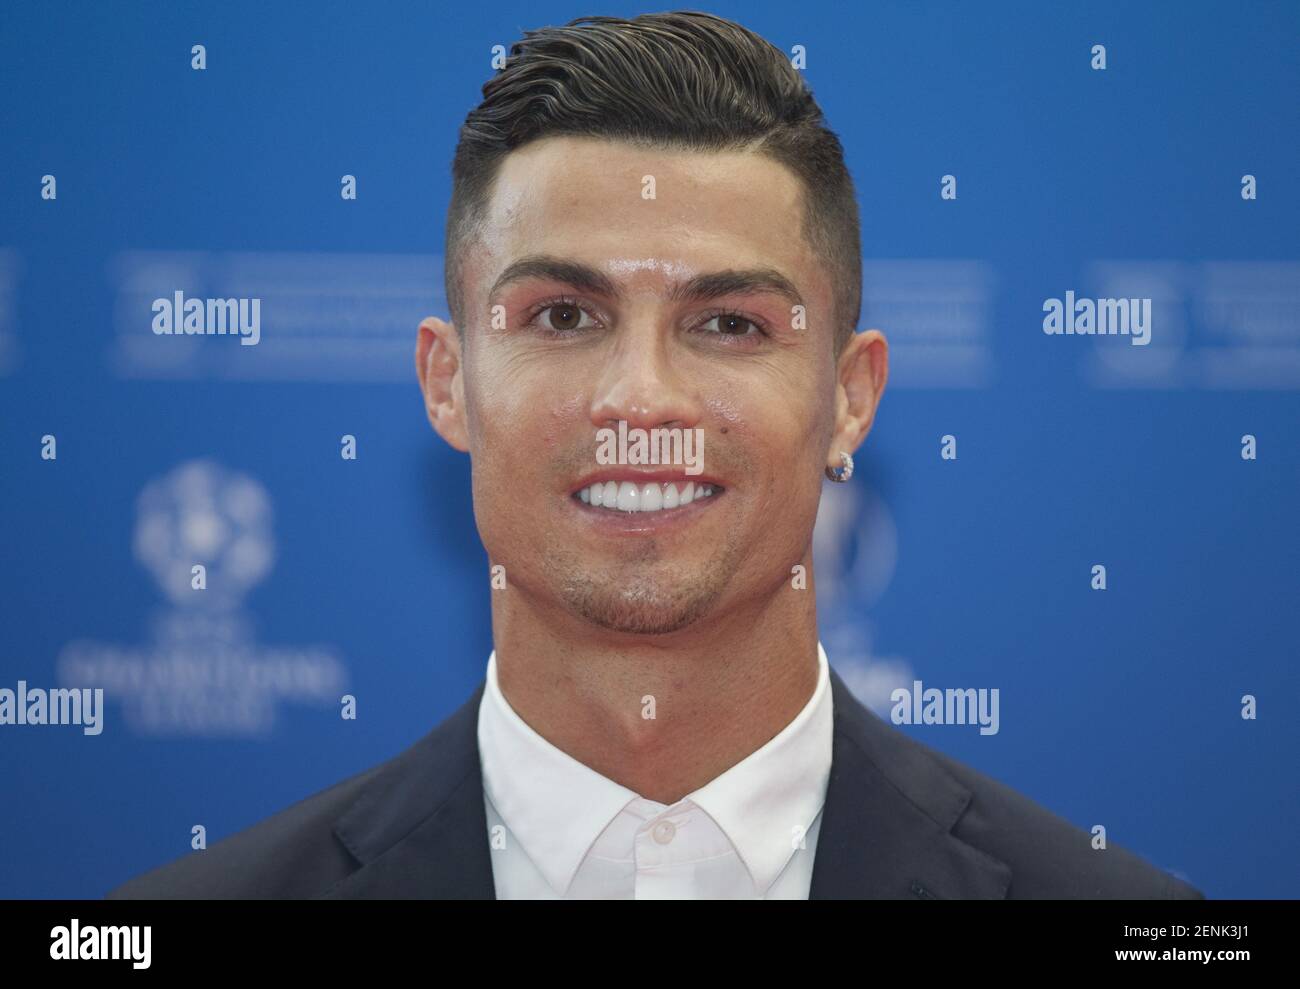 Monaco, Monte Carlo - August 29, 2019: UEFA Champions League Group Stage Draw and Player of the Year Awards, Season Kick Off 2019-2020 with Cristiano Ronaldo of Juventus. (Photo by Mandoga Media/Sipa USA) Stock Photo